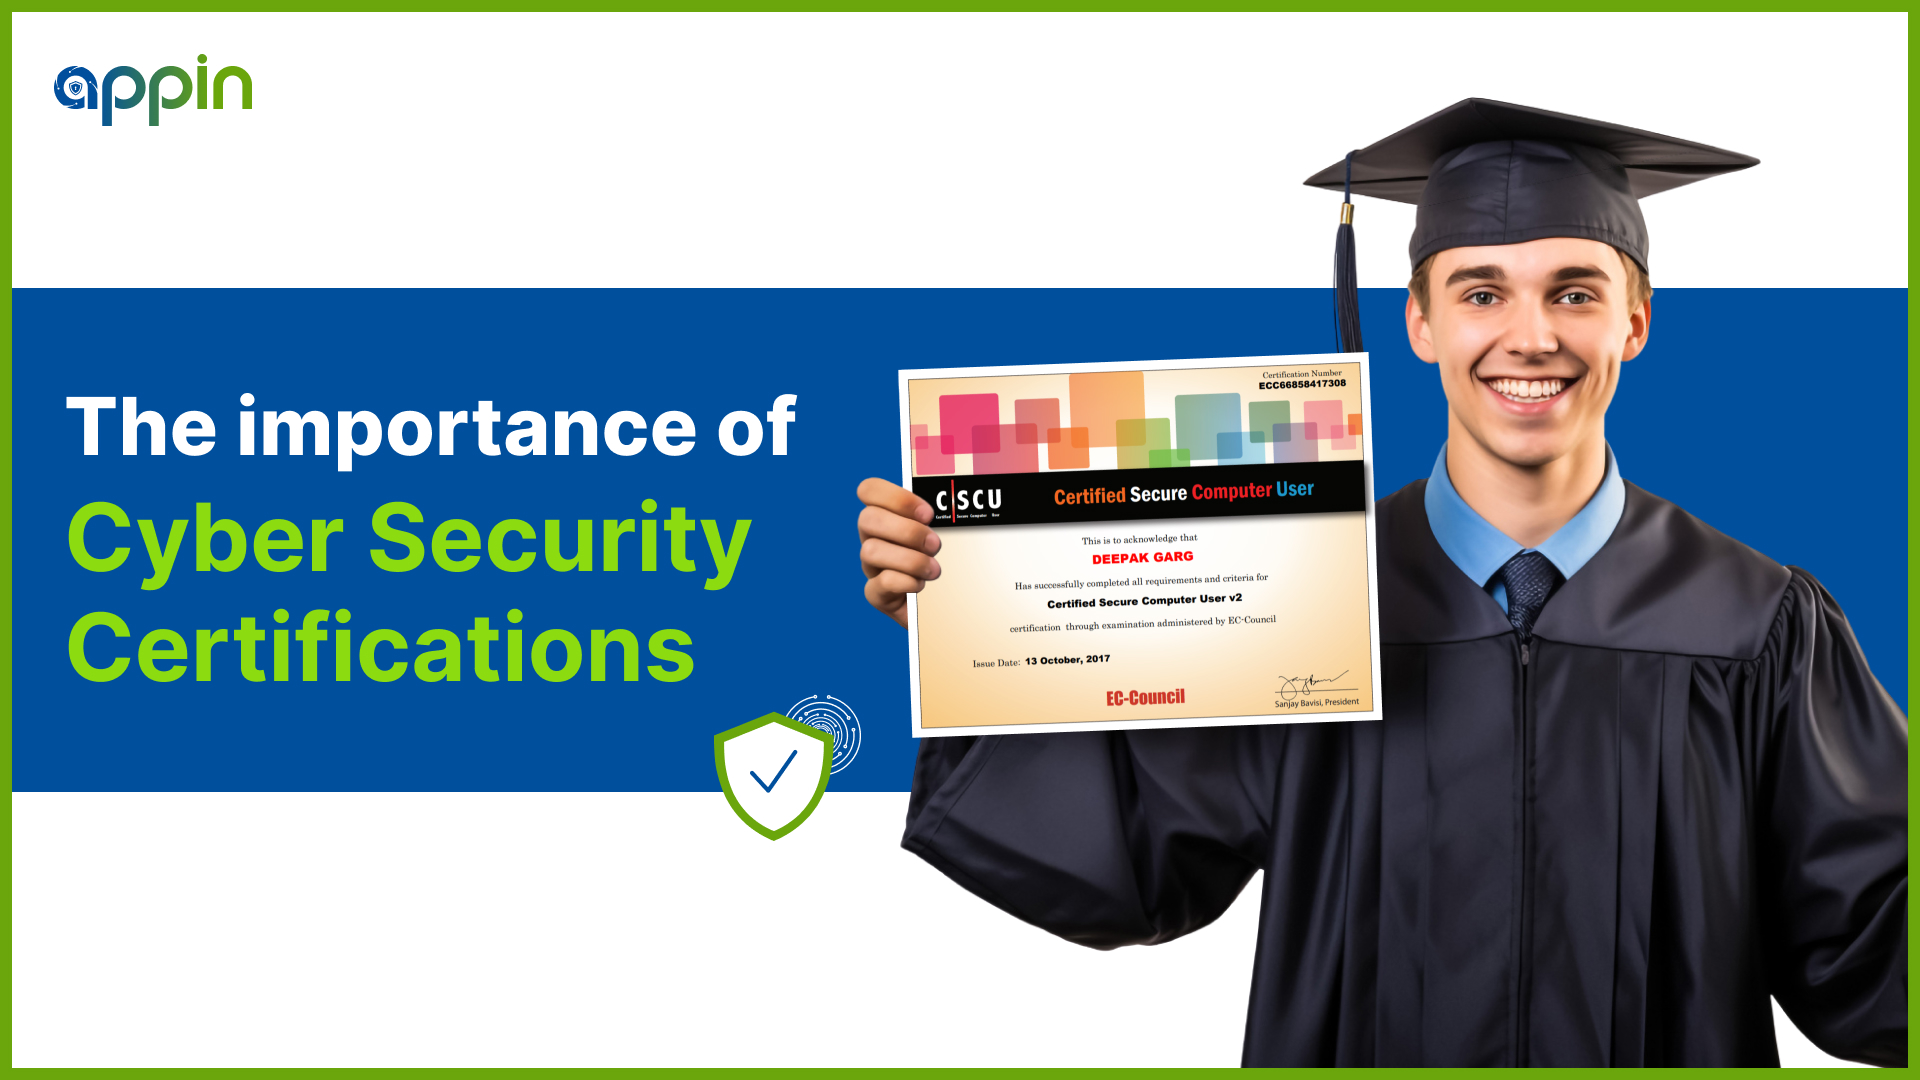 The Importance of Cyber Security Certifications